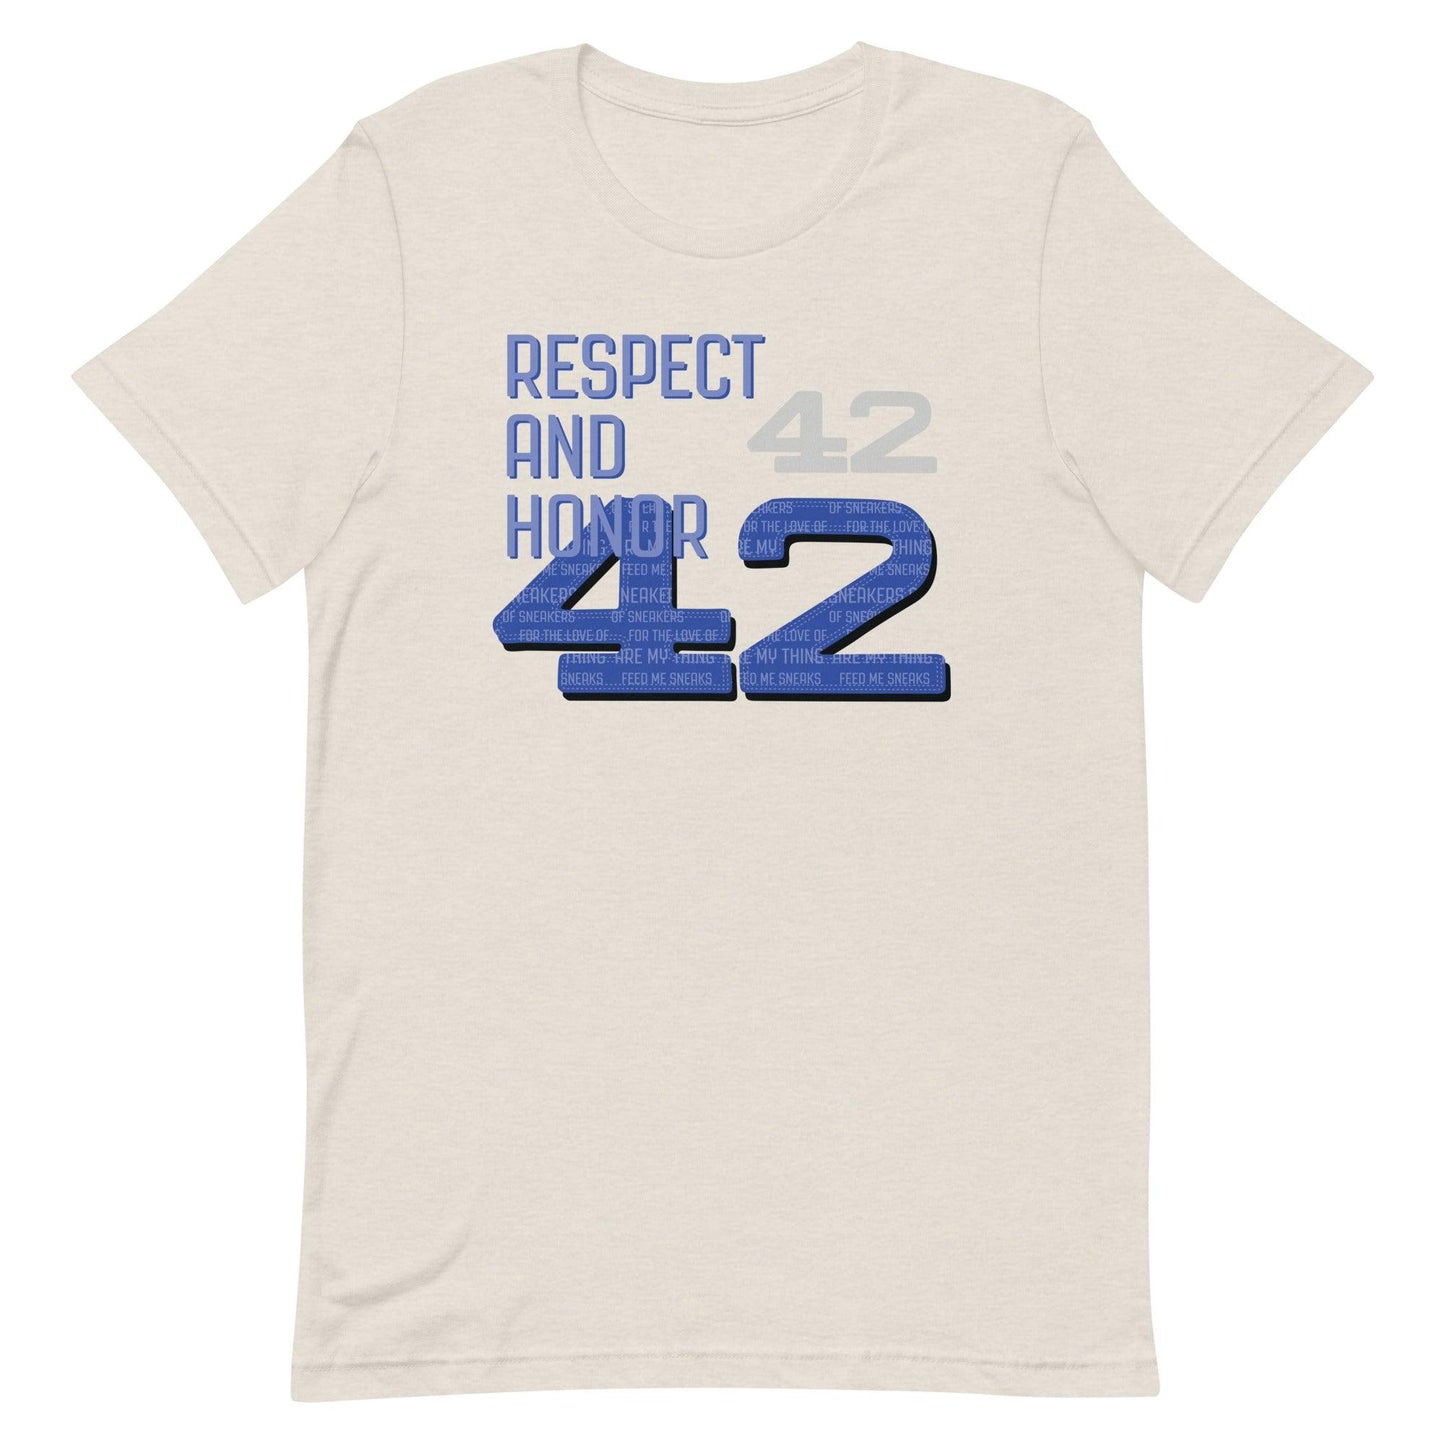 Respect Shirt To Match Nike Dunk Low Jackie Robinson - SNKADX